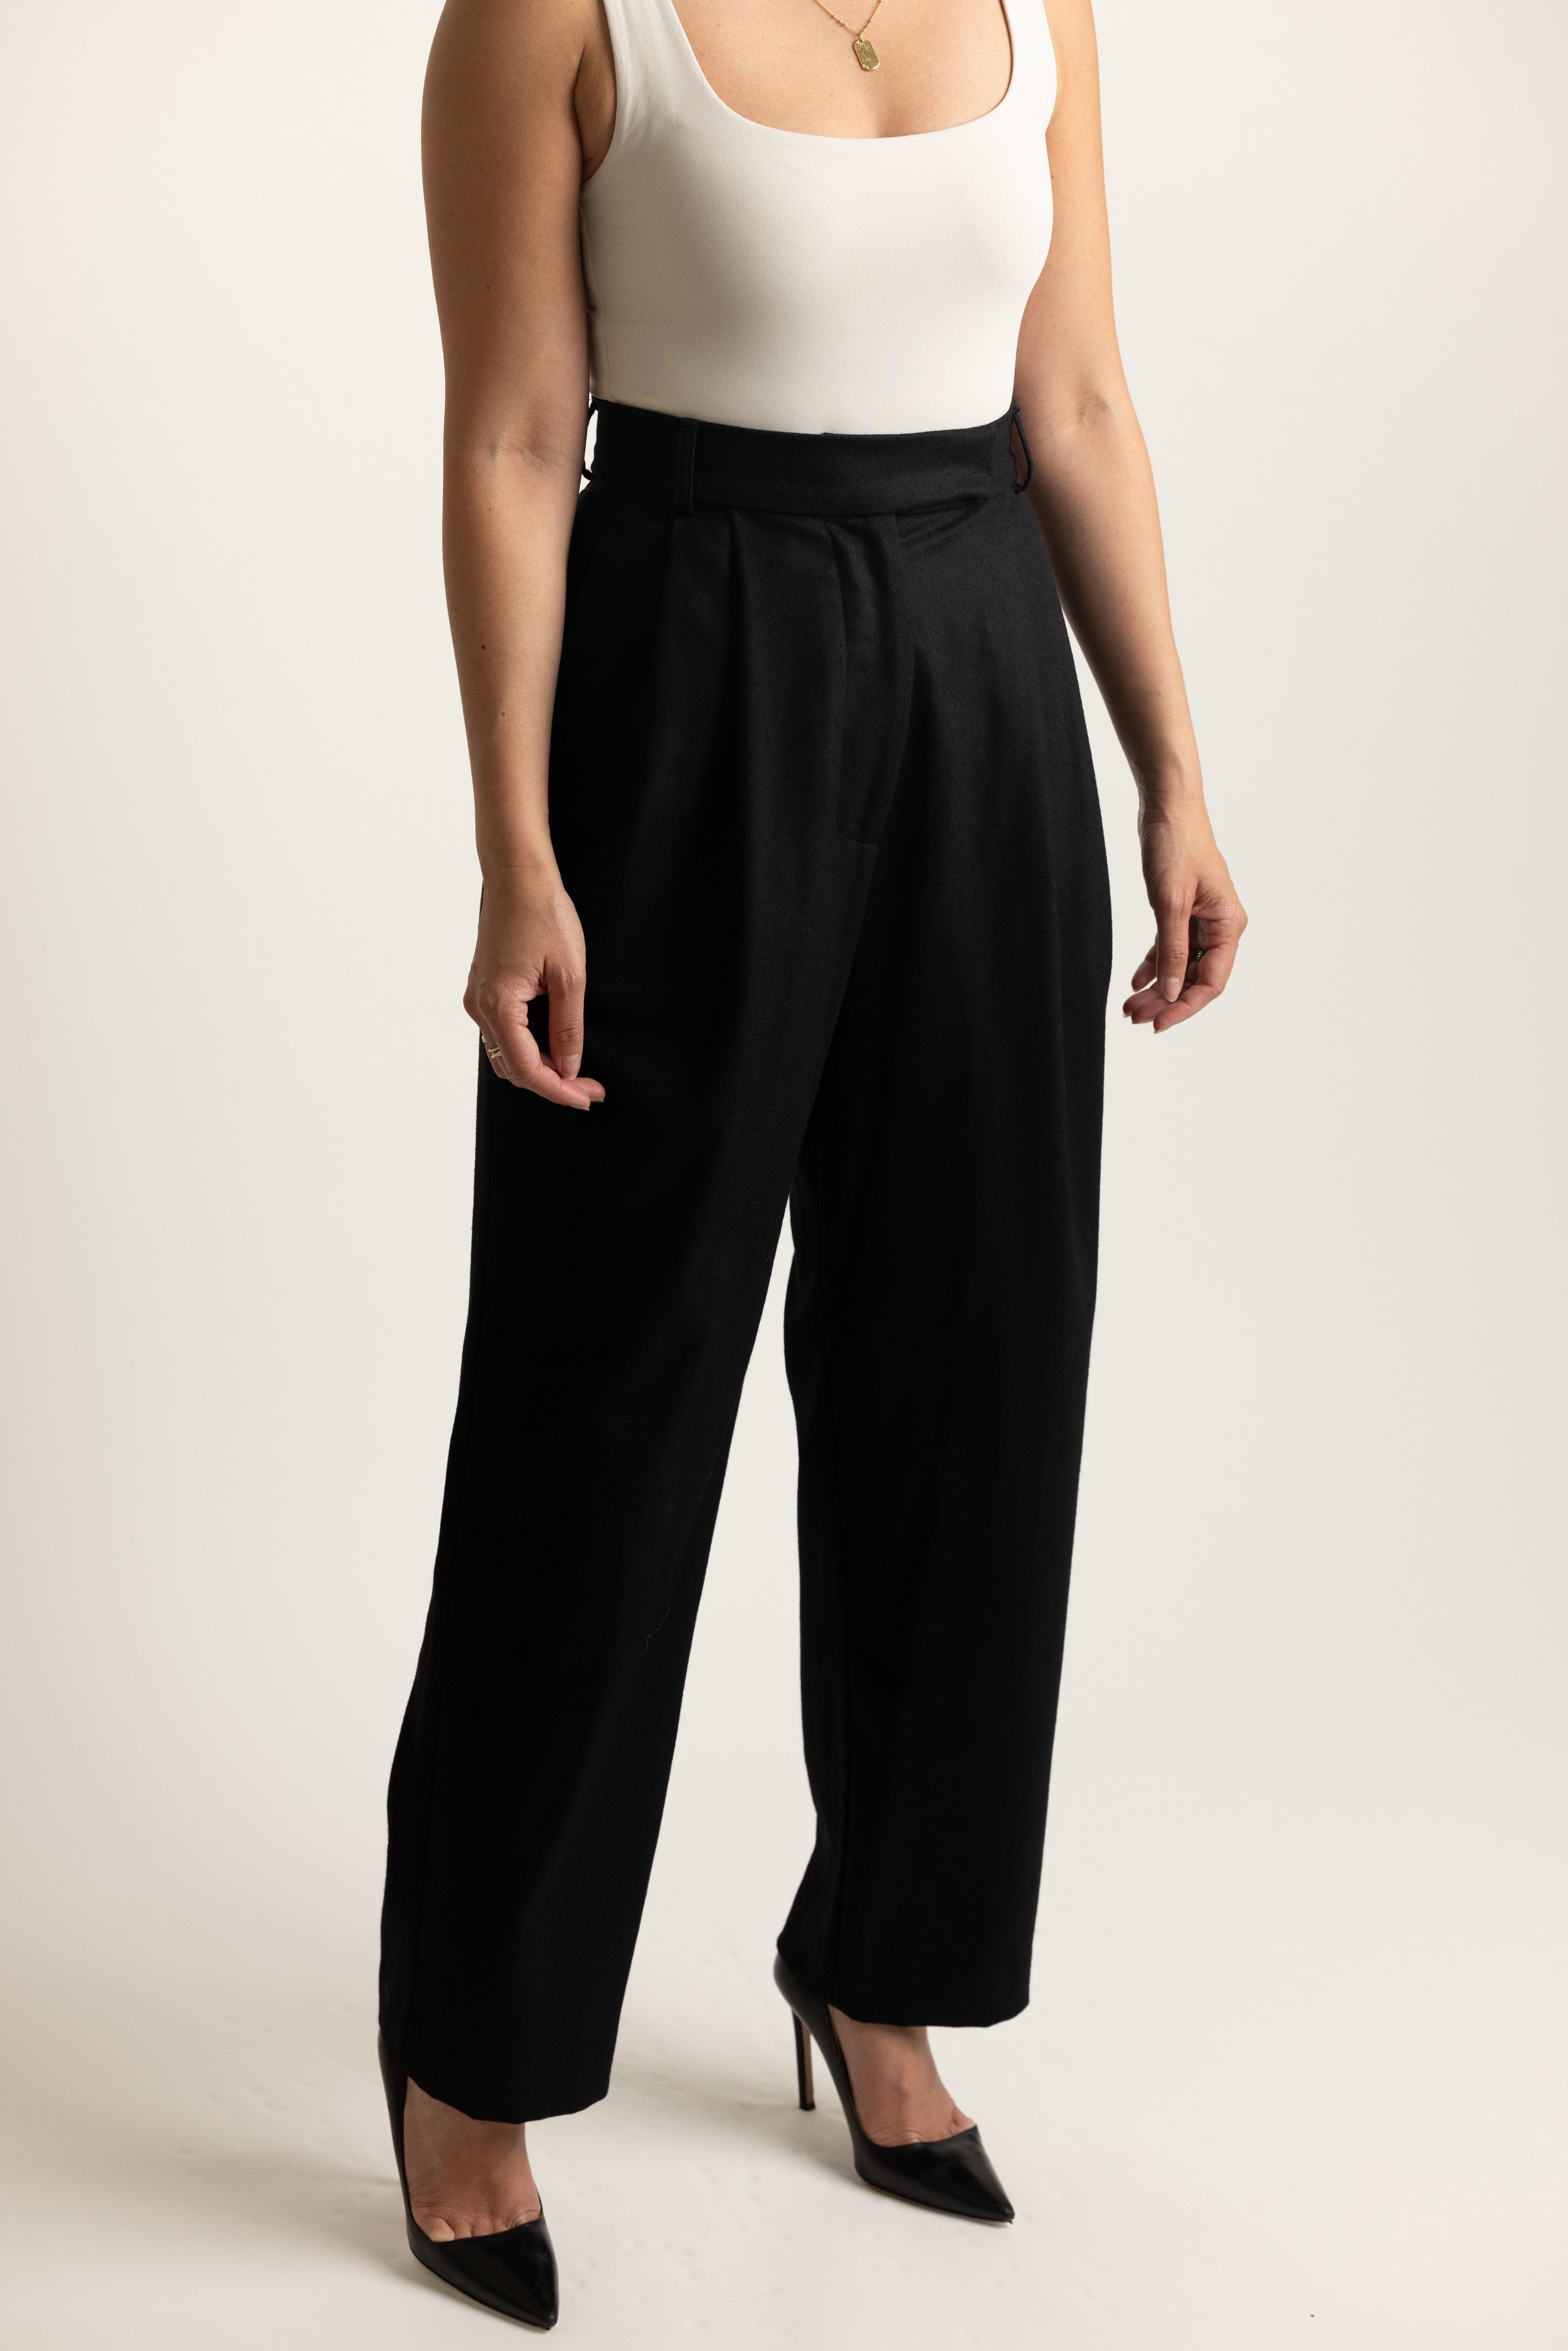 Trial Trouser in Black - front side view